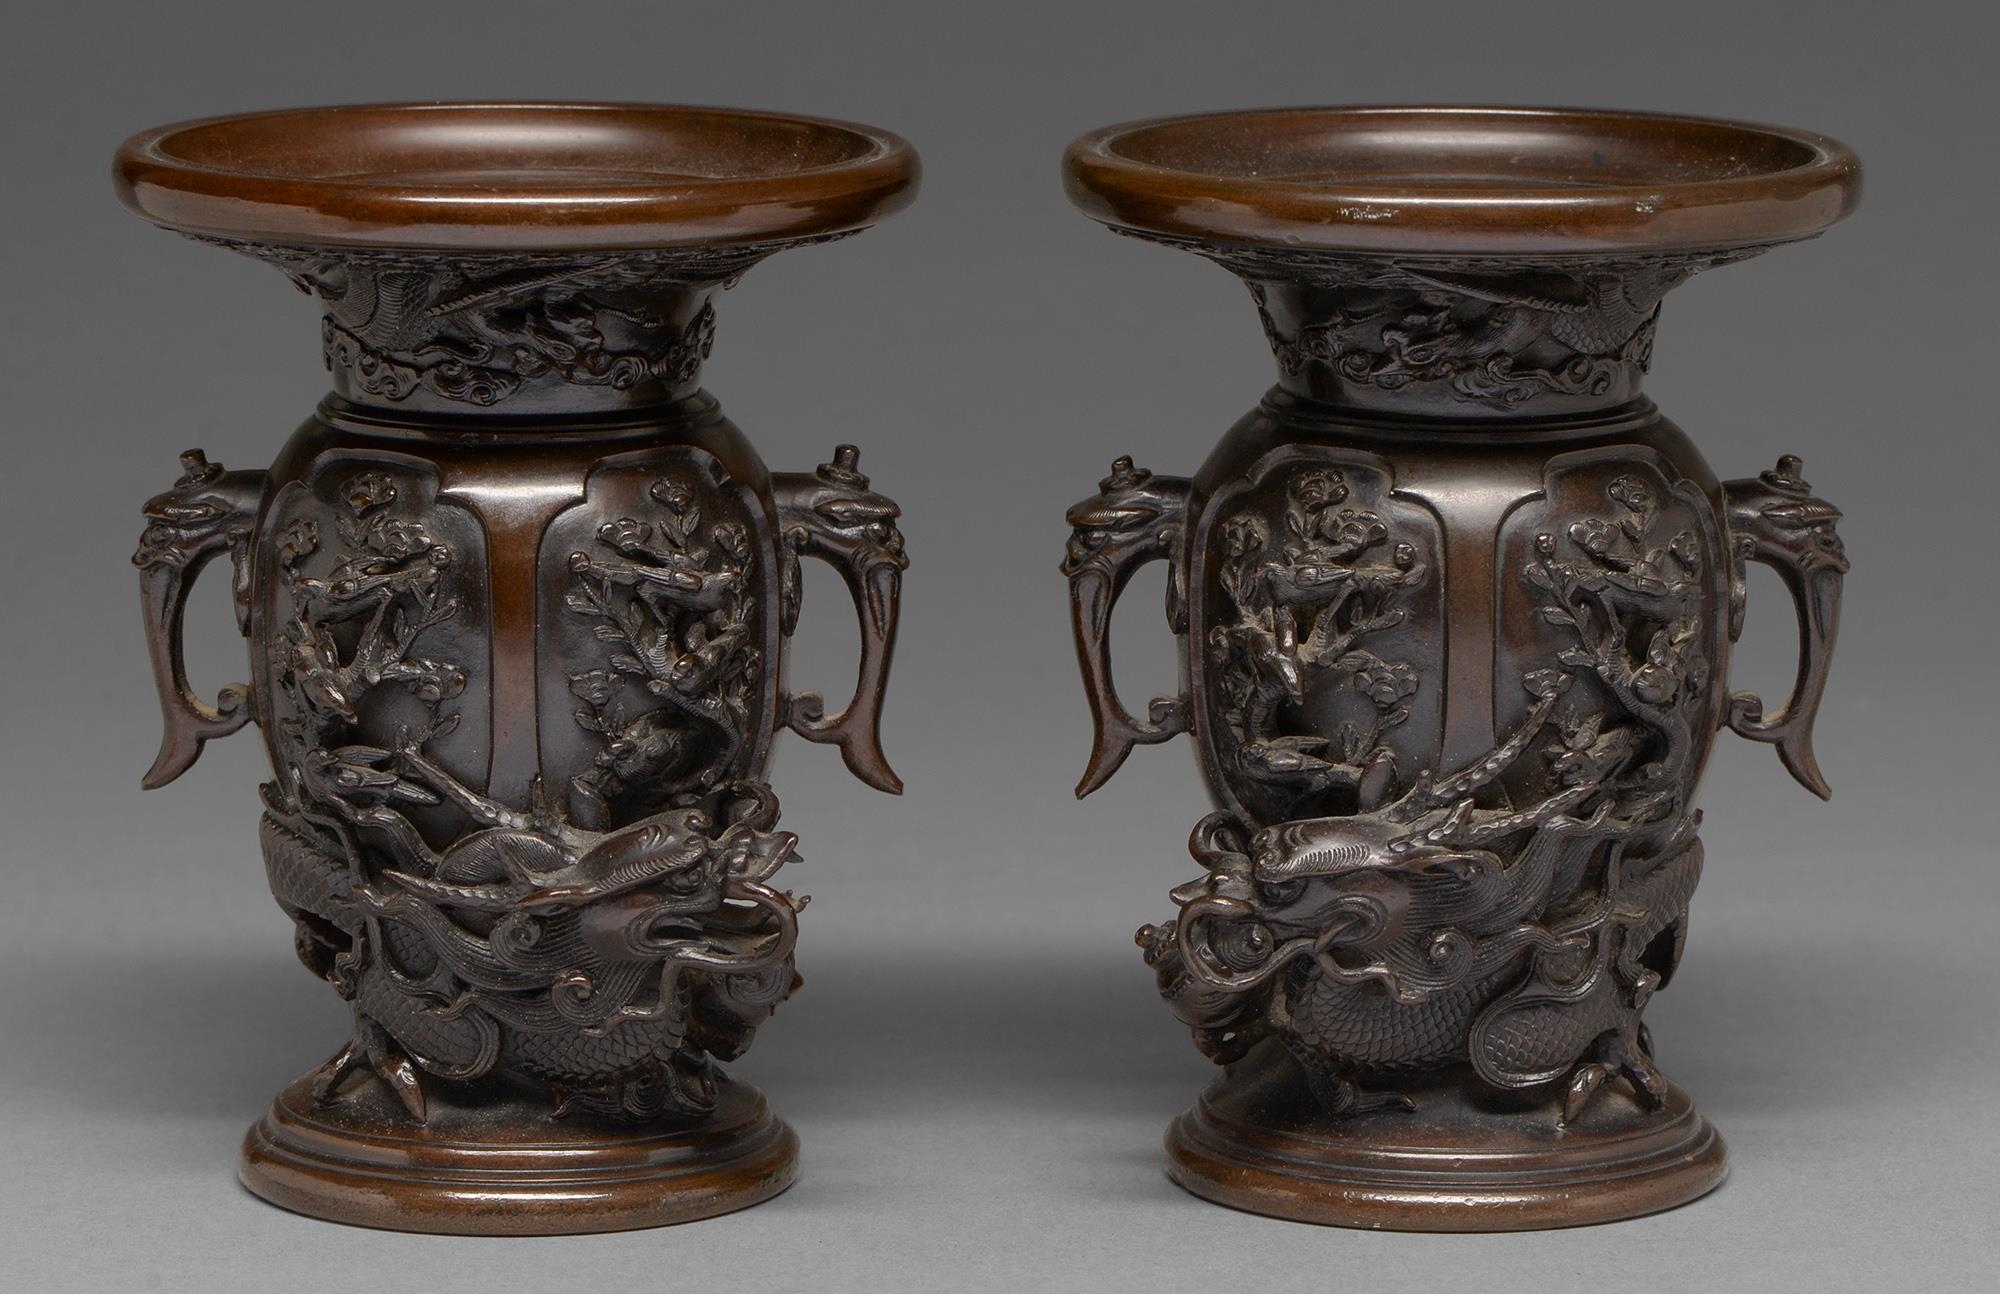 A pair of Japanese bronze dragon and phoenix vases, Meiji period, with high relief cast and